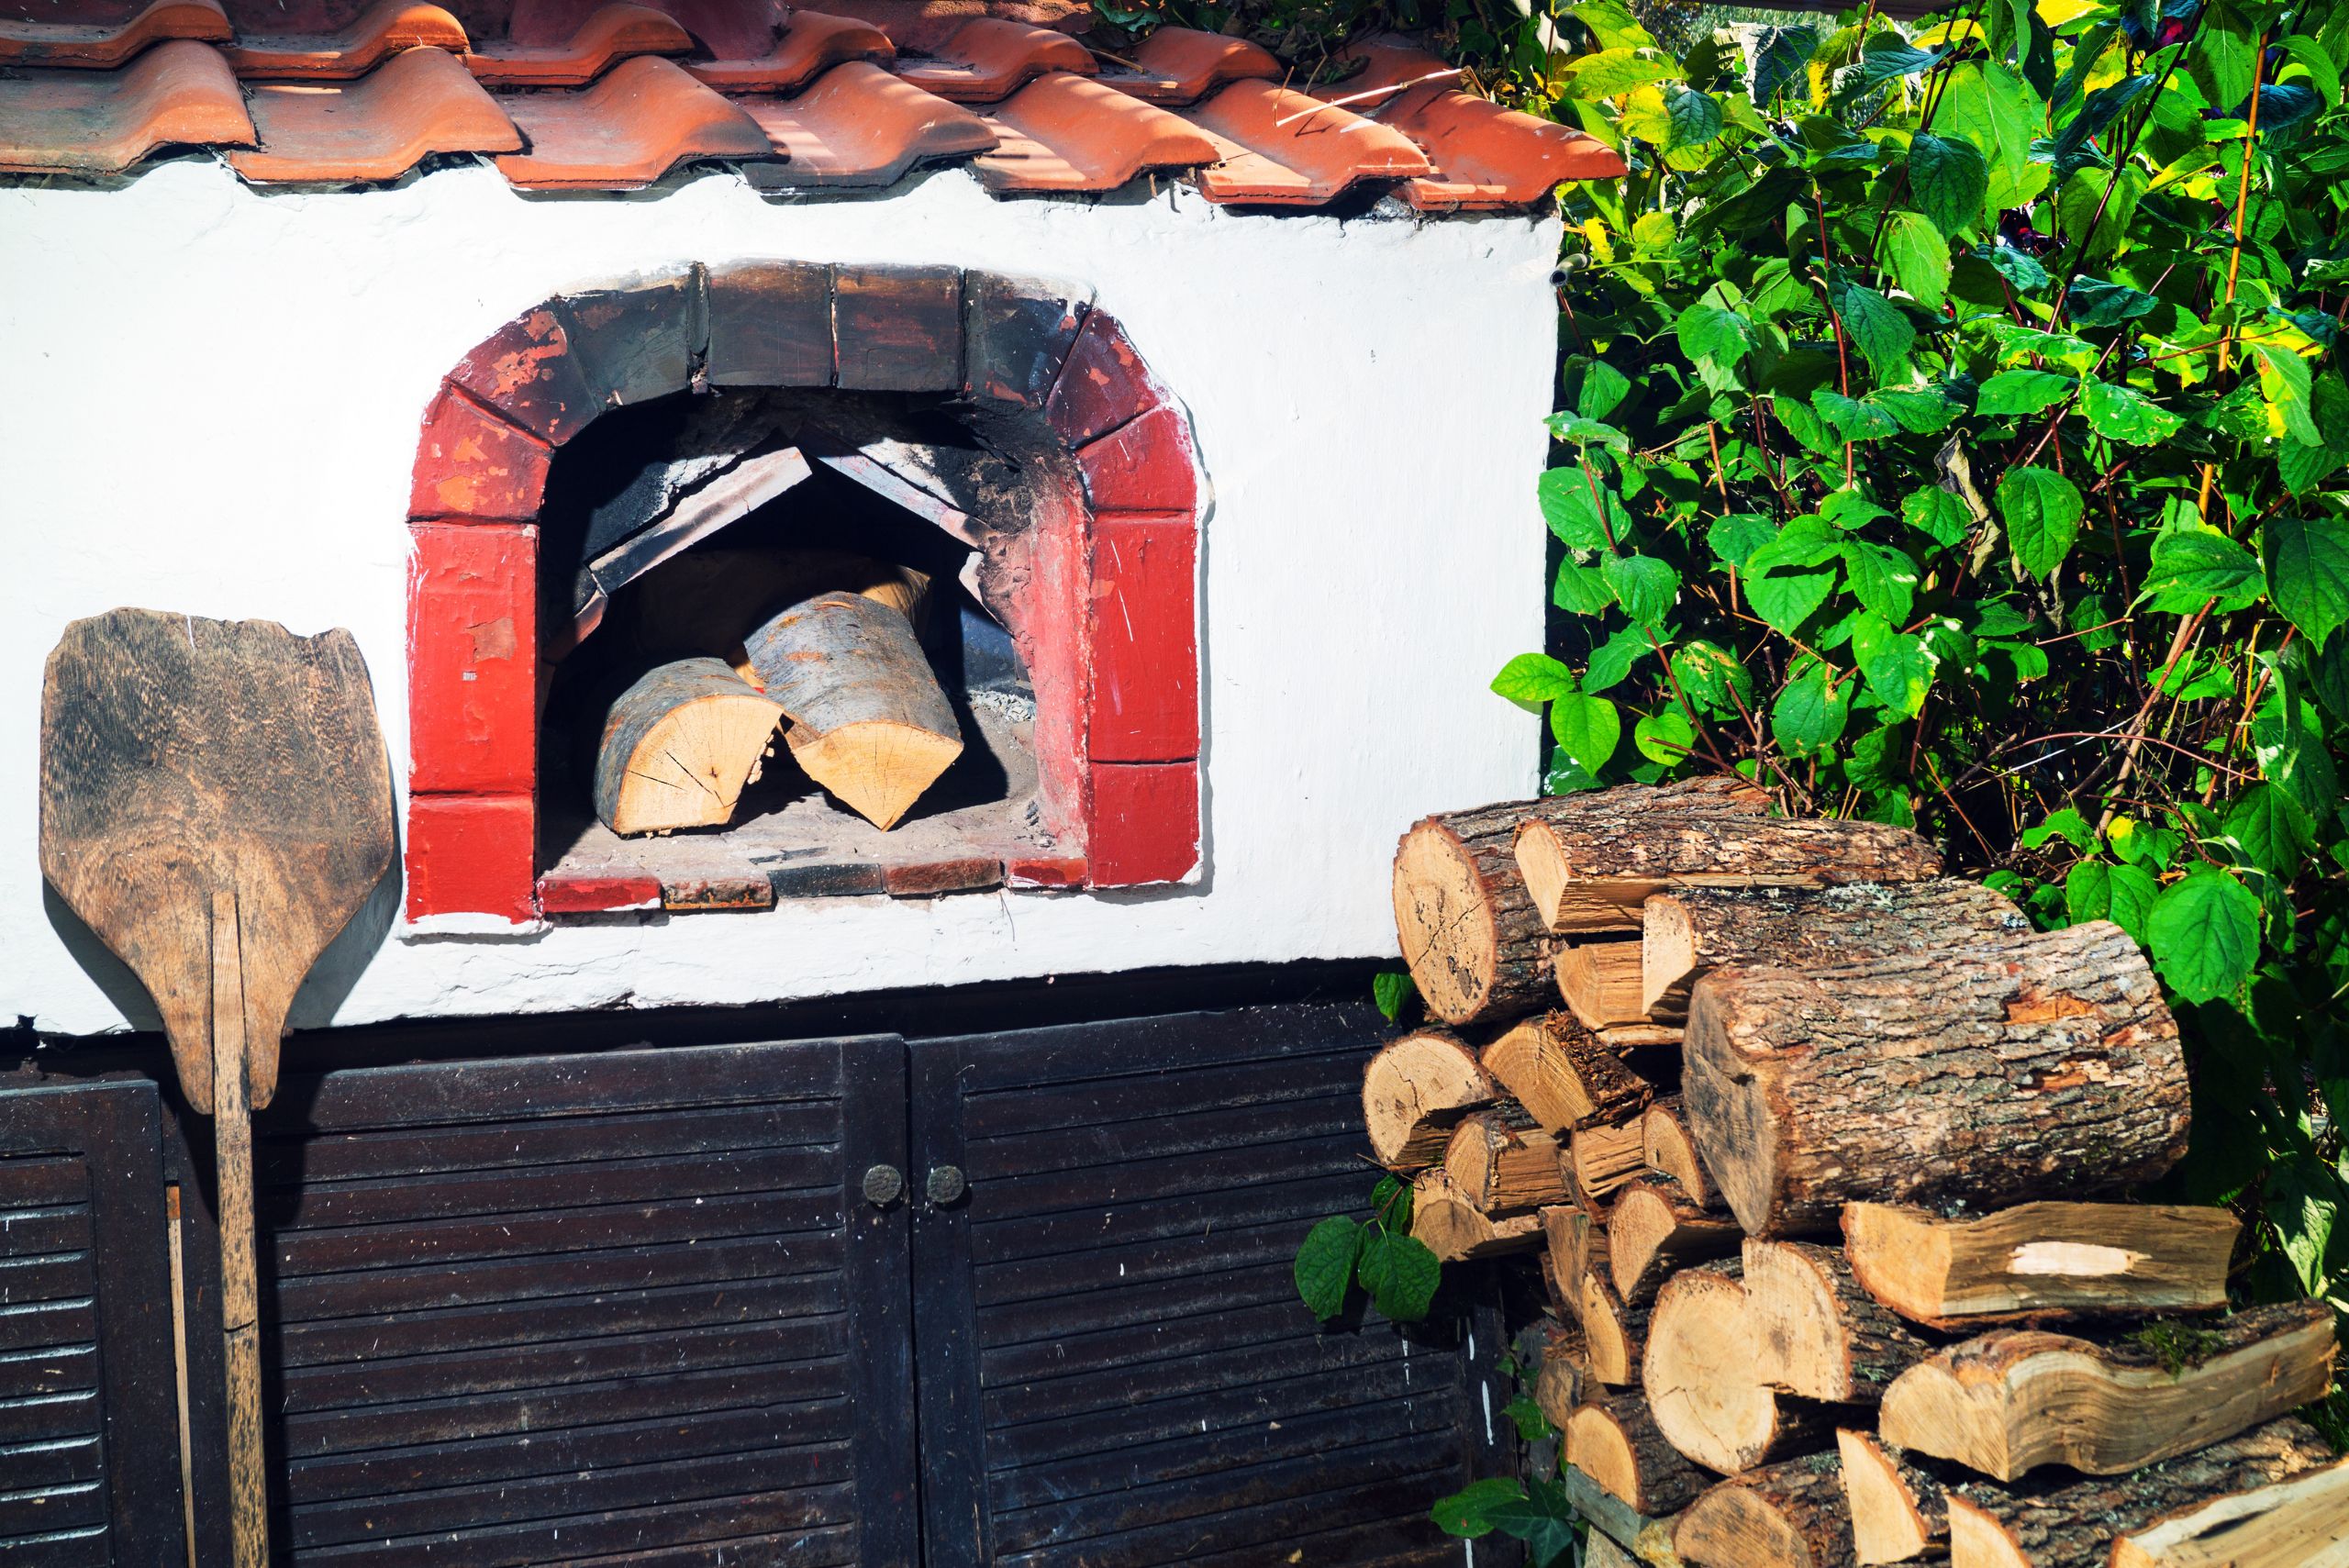 A traditional pizza oven